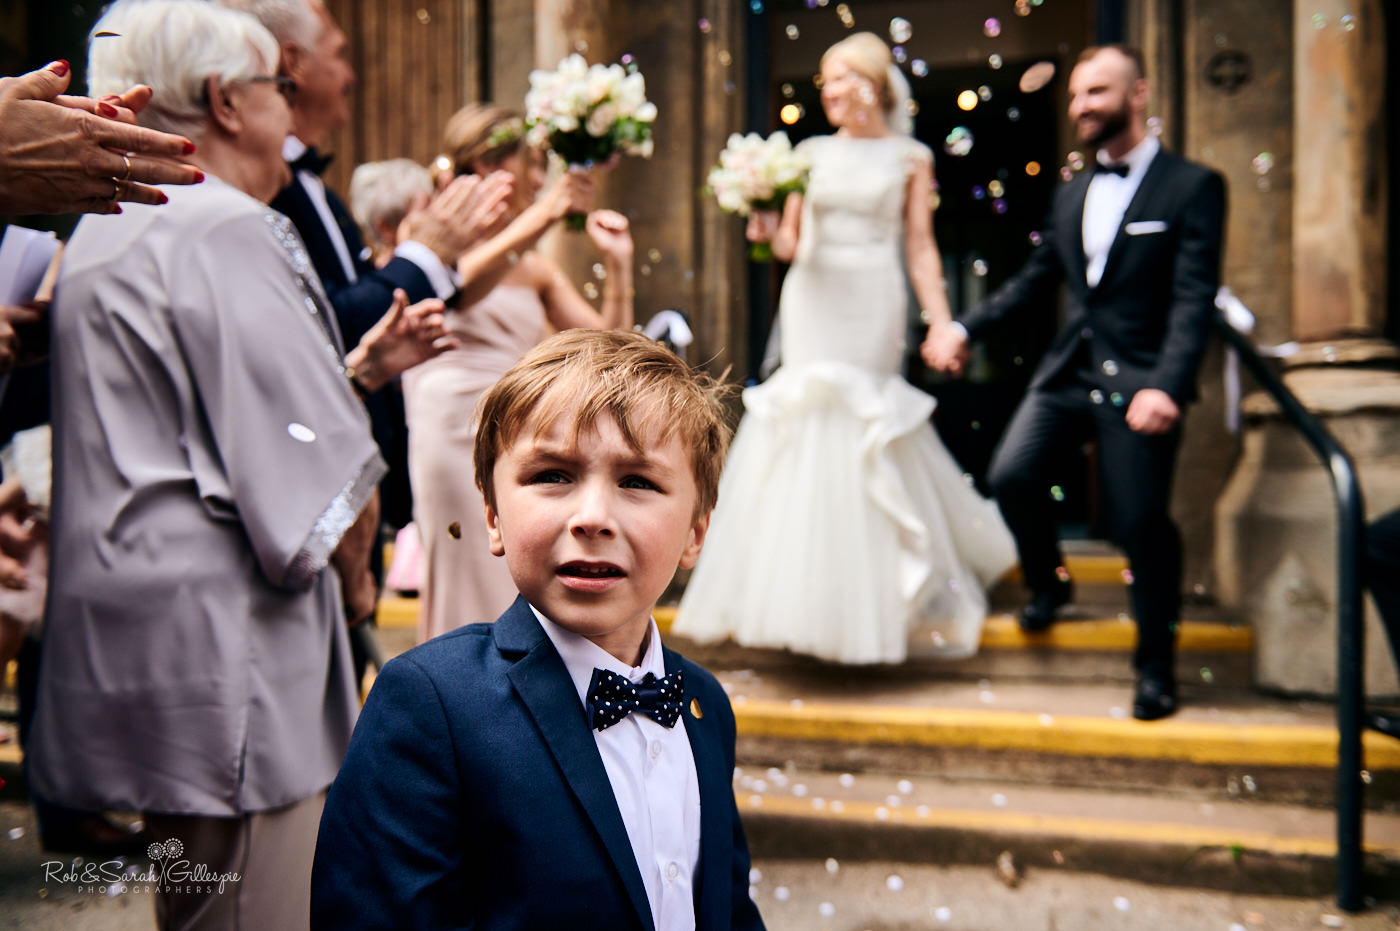 Young boy looks back as bride and groom have confetti thrown